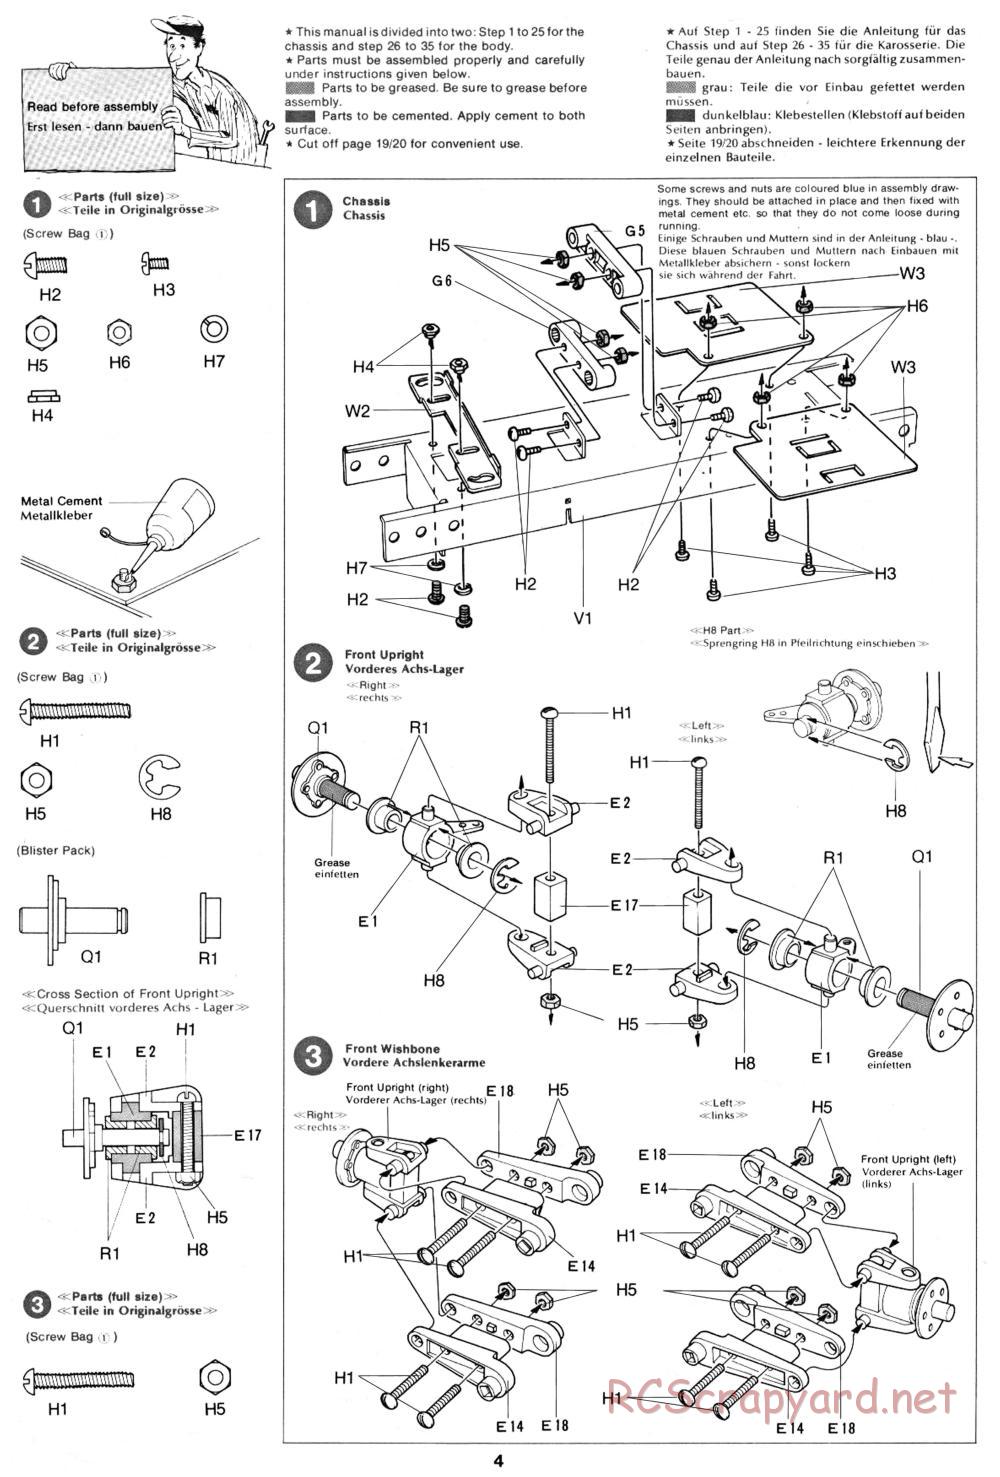 Tamiya - XR311 Combat Support Vehicle (1977) Chassis - Manual - Page 4